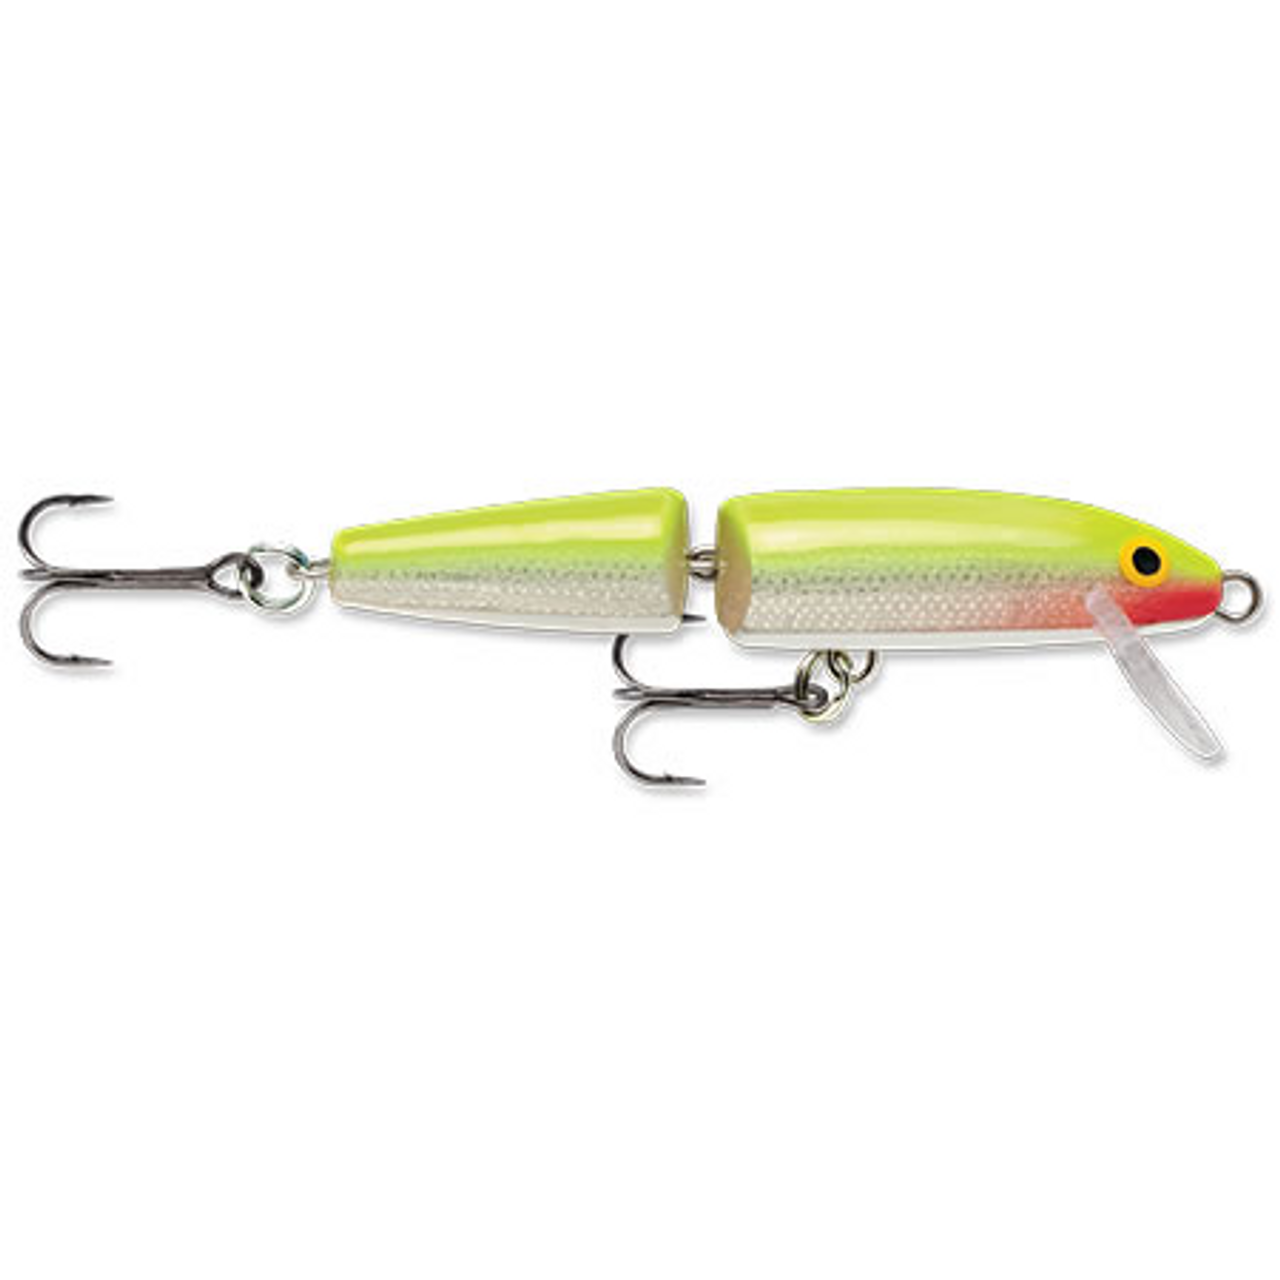 Rapala Jointed Minnow, 3 1/2, 1/4 oz, Silver Fluorescent Chartreuse - SFRC